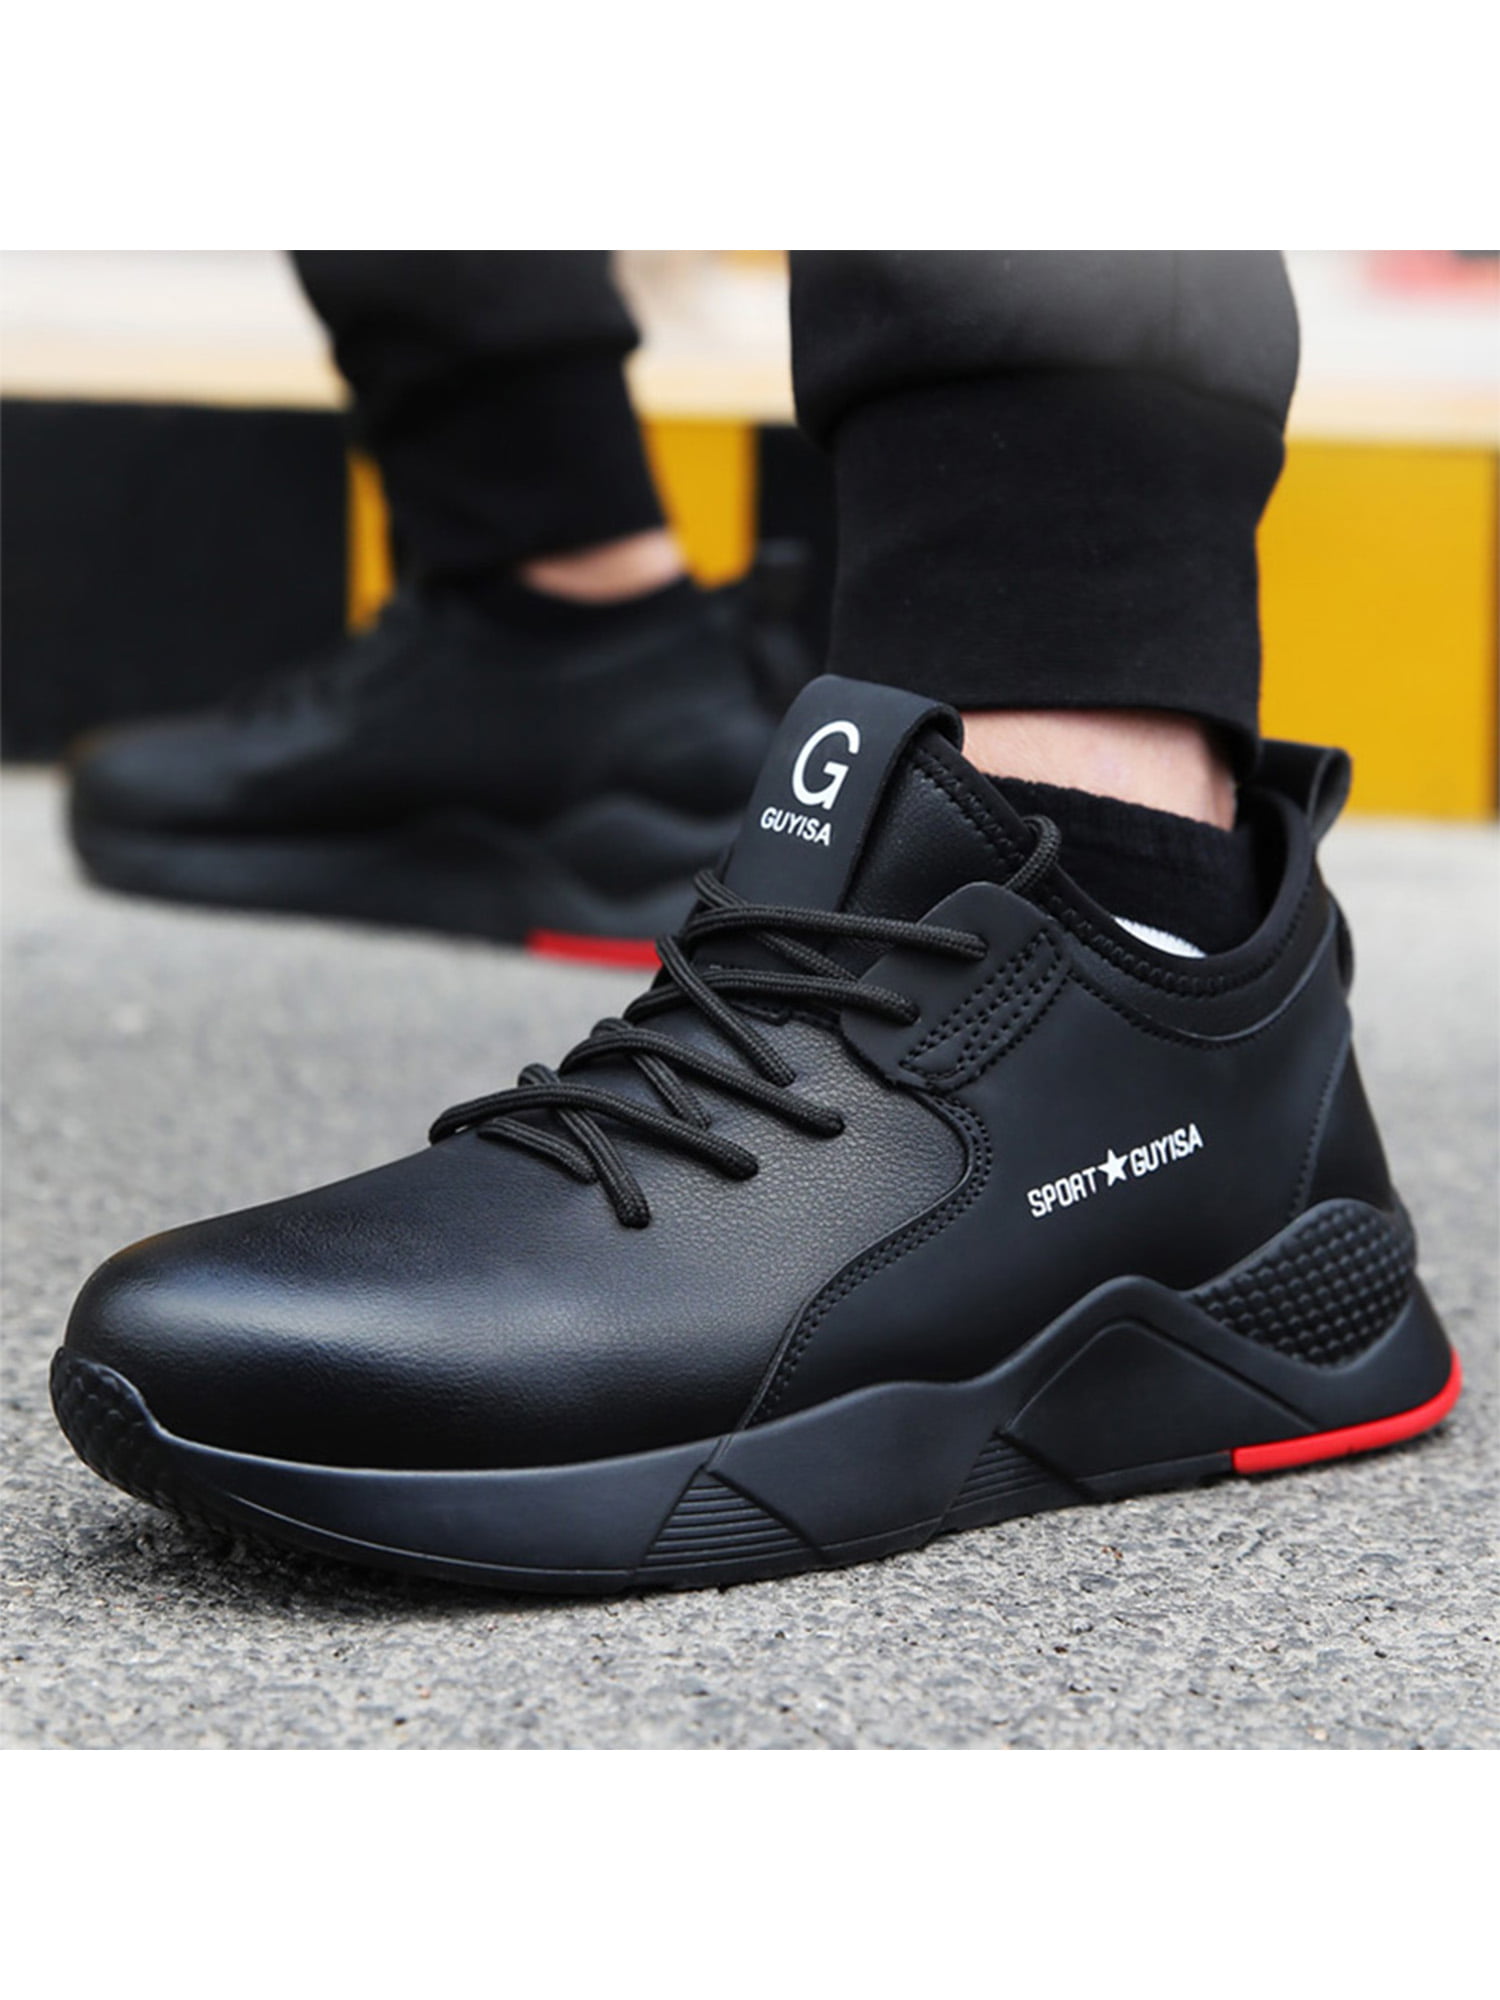 Black Safety Shoes Trainers for Men Women Steel Toe Lightweight Work Sport Shoes 